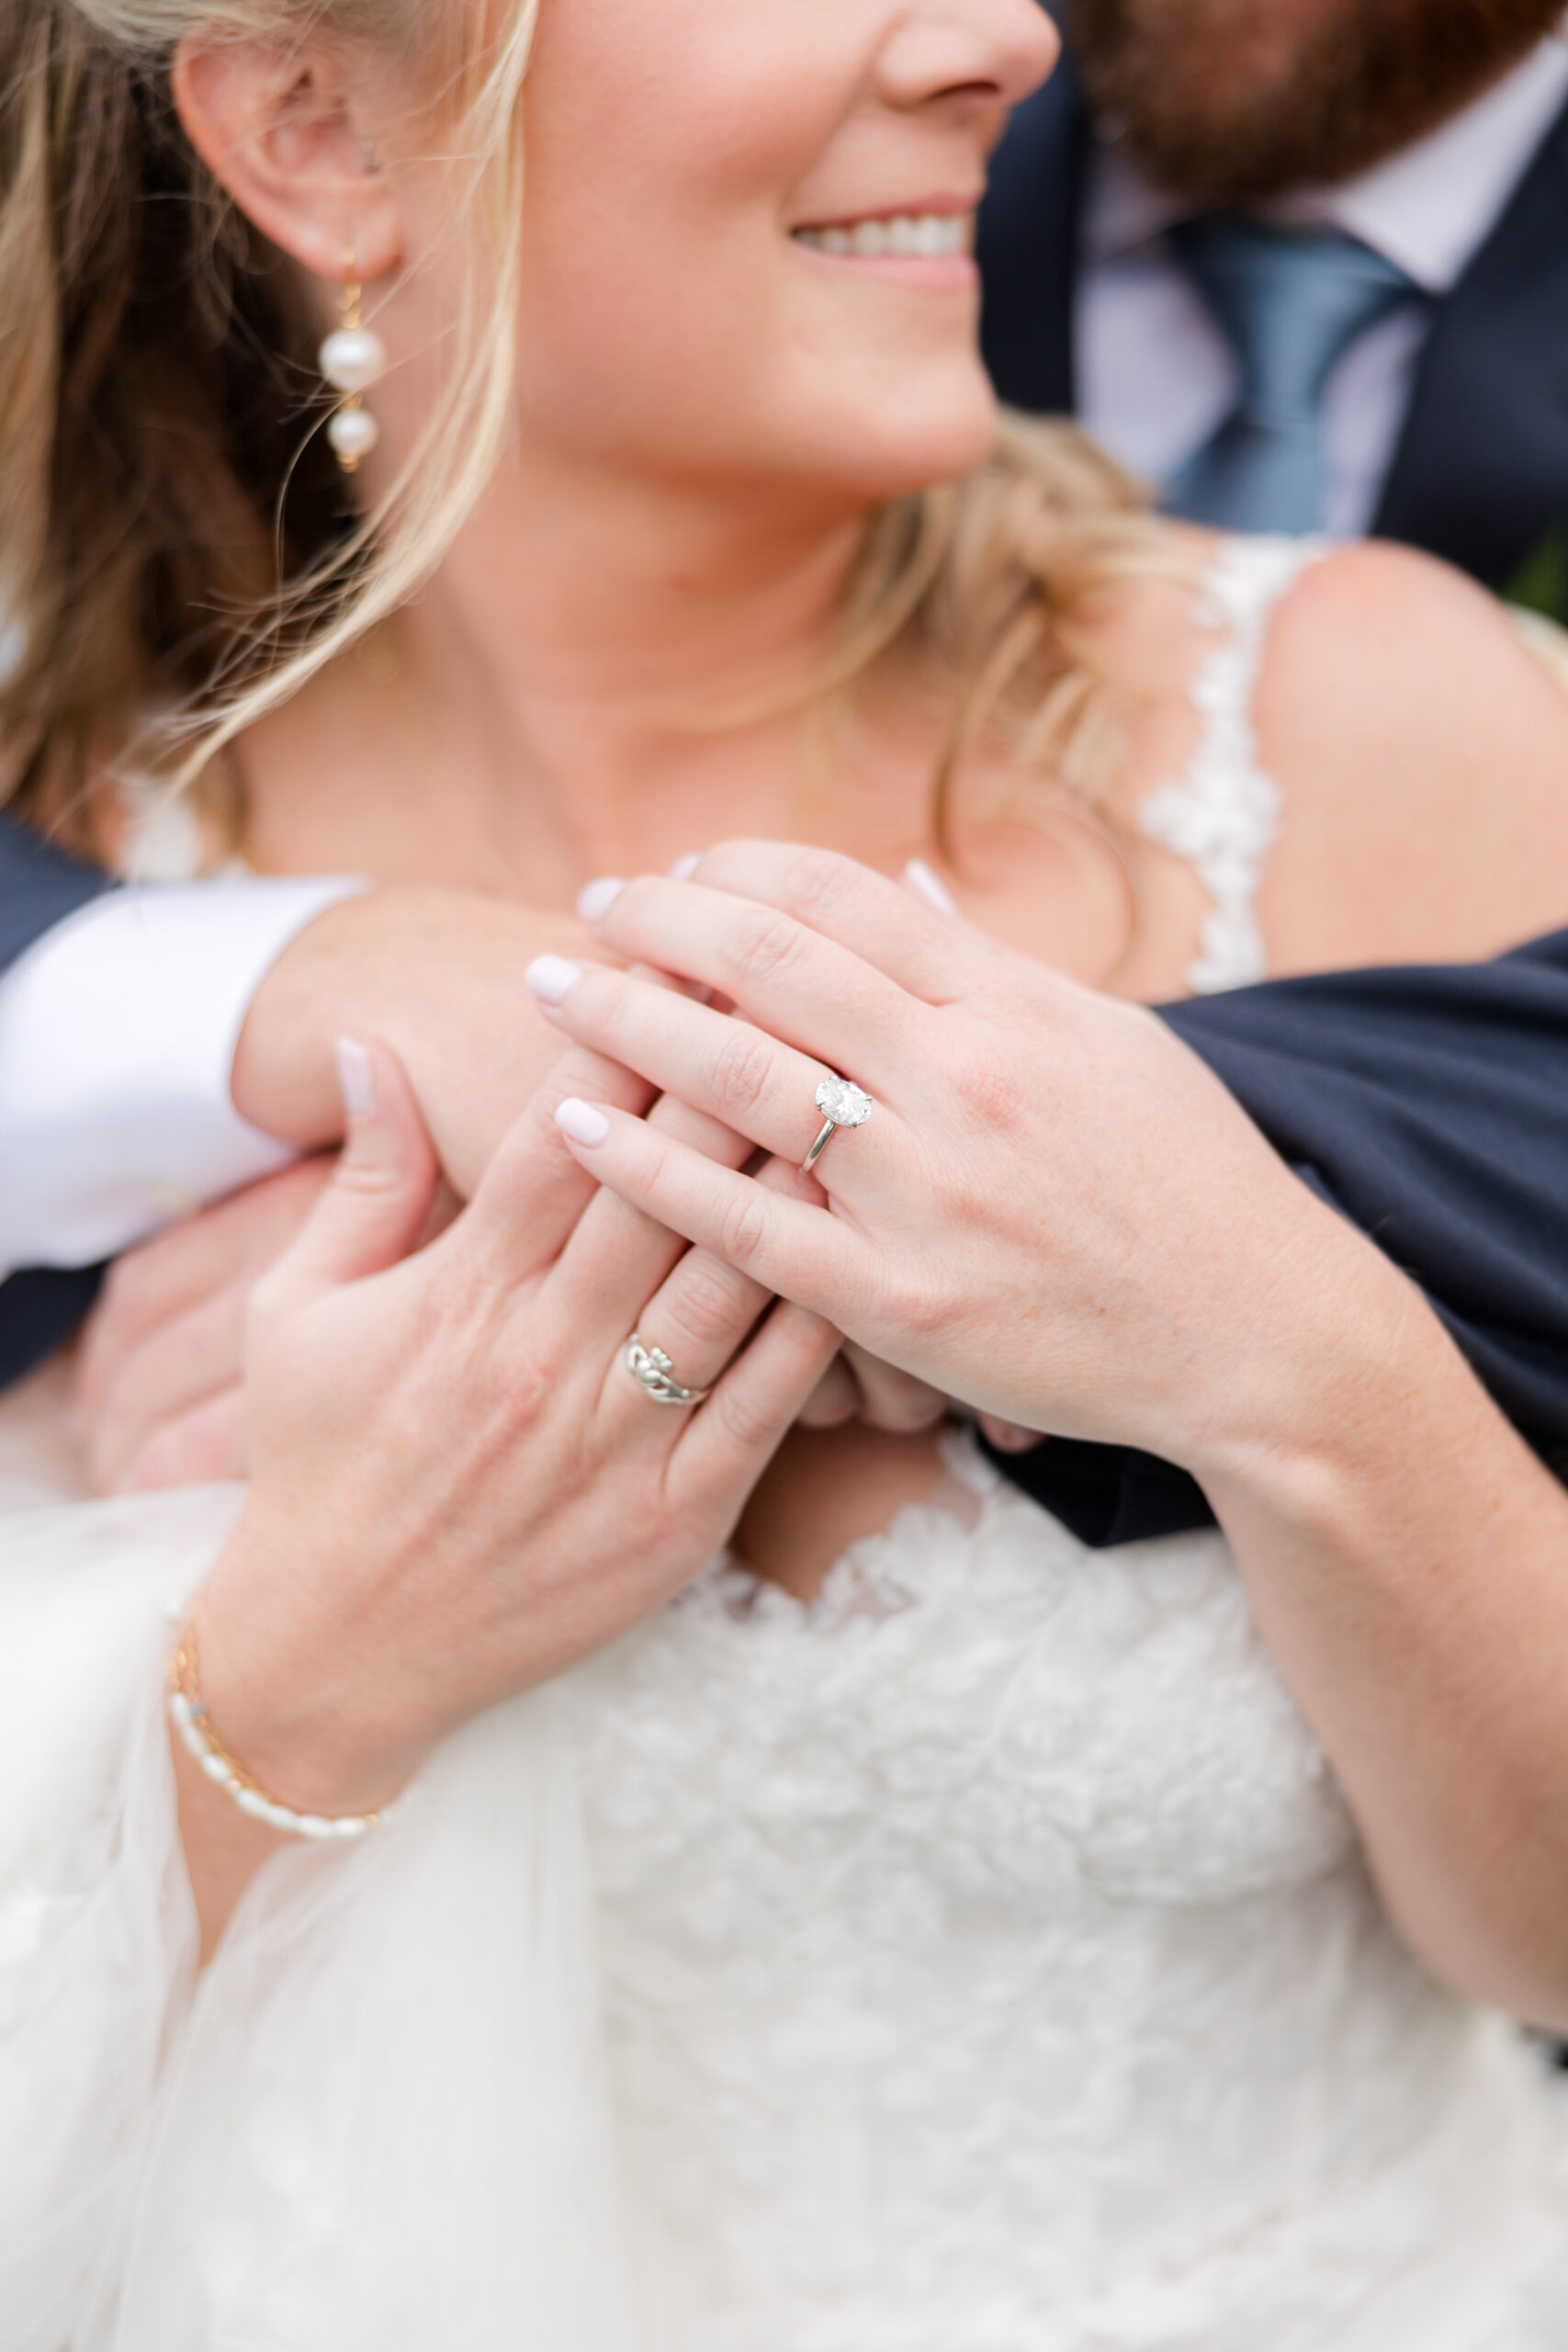 details of the couple holding hands